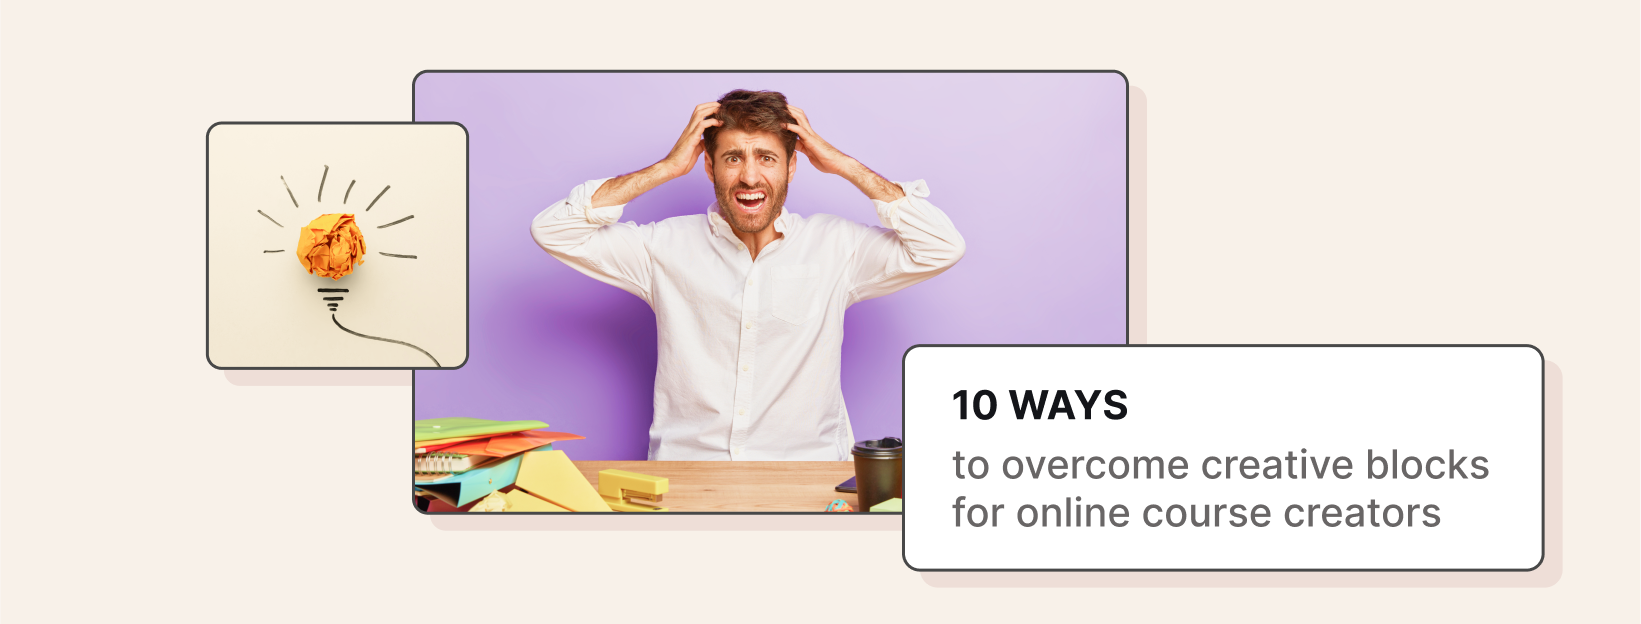 The 10 ways to overcome creative blocks for online course creators